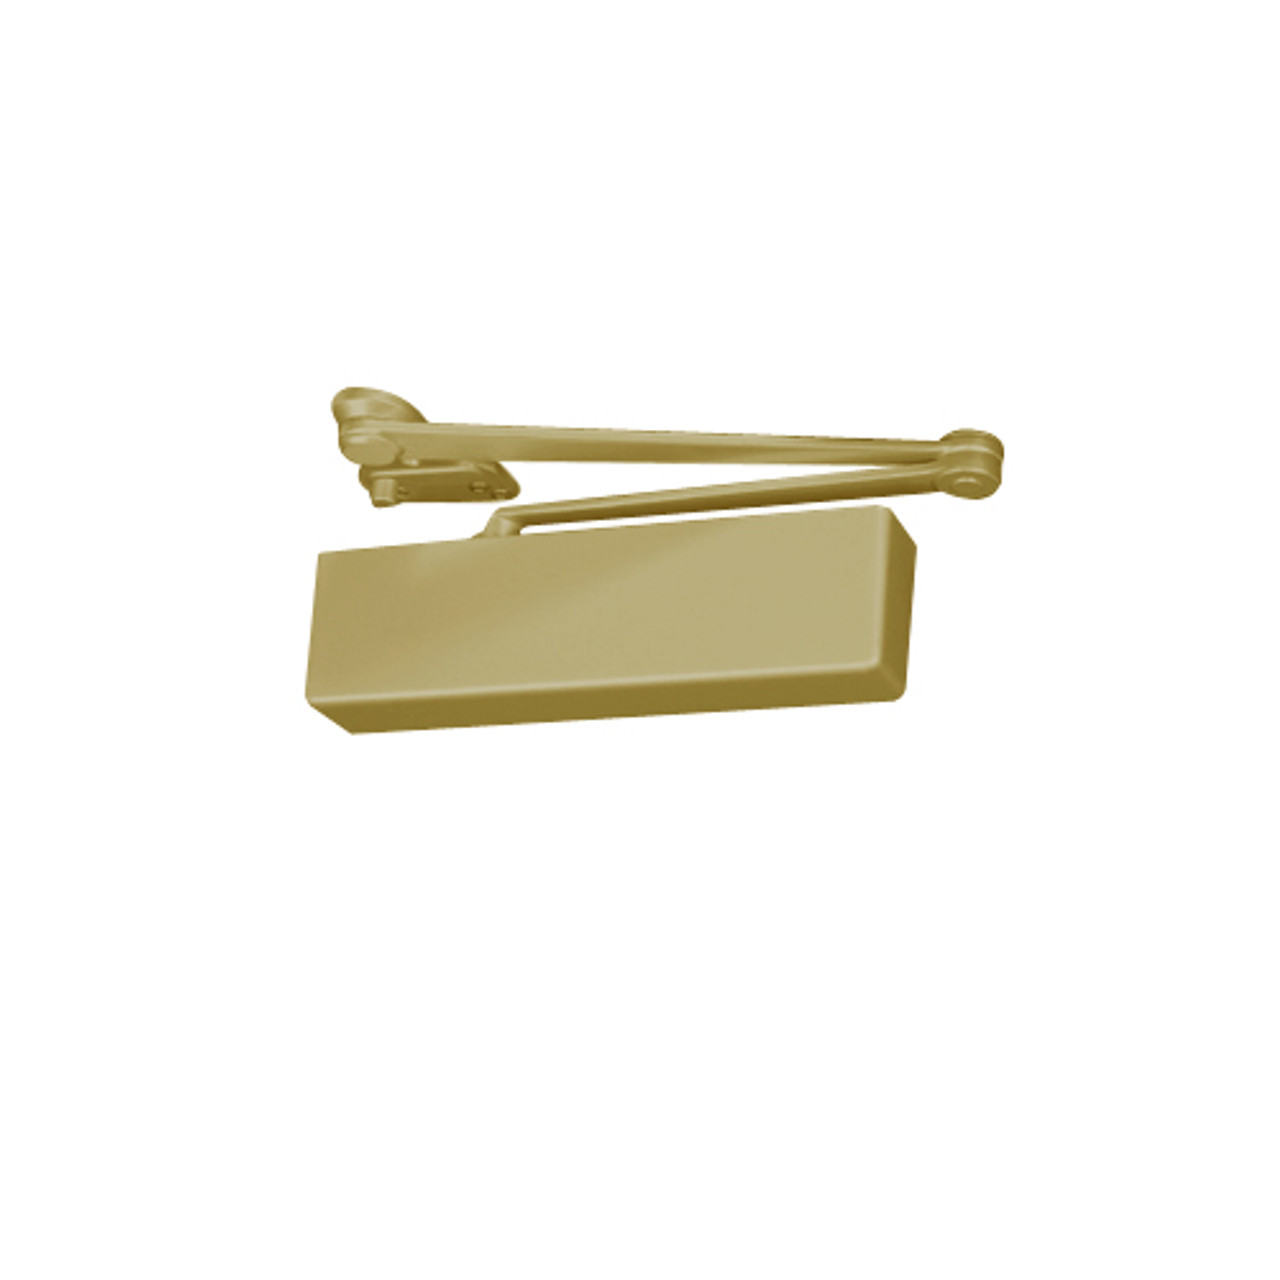 CLP7570TDA-696-RH Norton 7570 Series Security Door CloserPlus Arm with Thumbturn Hold Open in Gold Finish